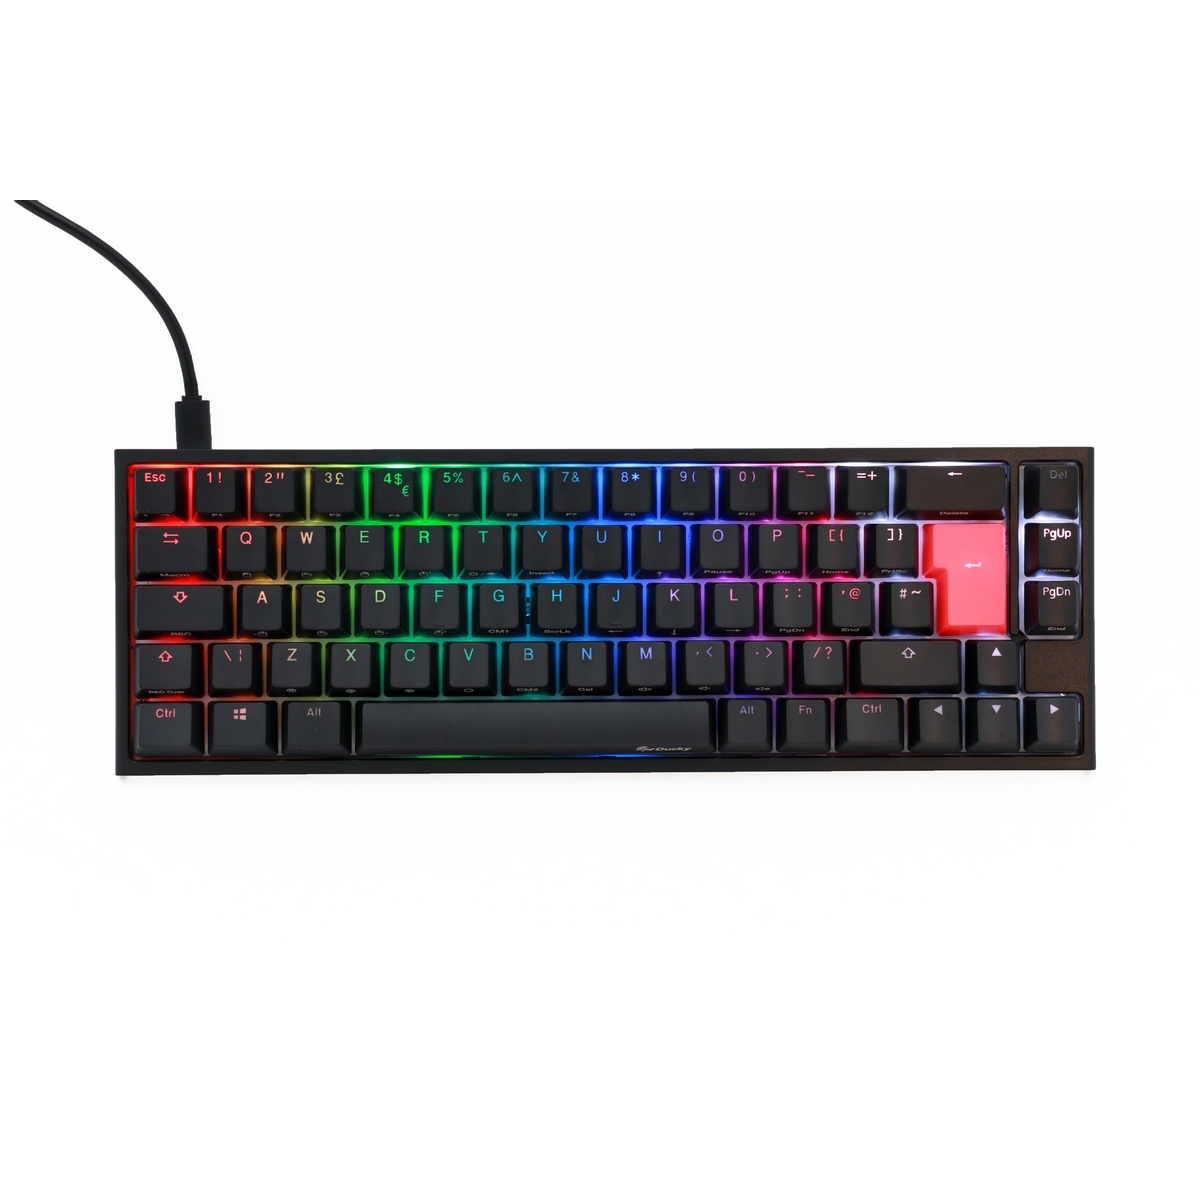 Ducky - Ducky One 2 SF 65% RGB Backlit Blue Cherry MX Switch Mechanical USB Gaming Keyboard UK Layout